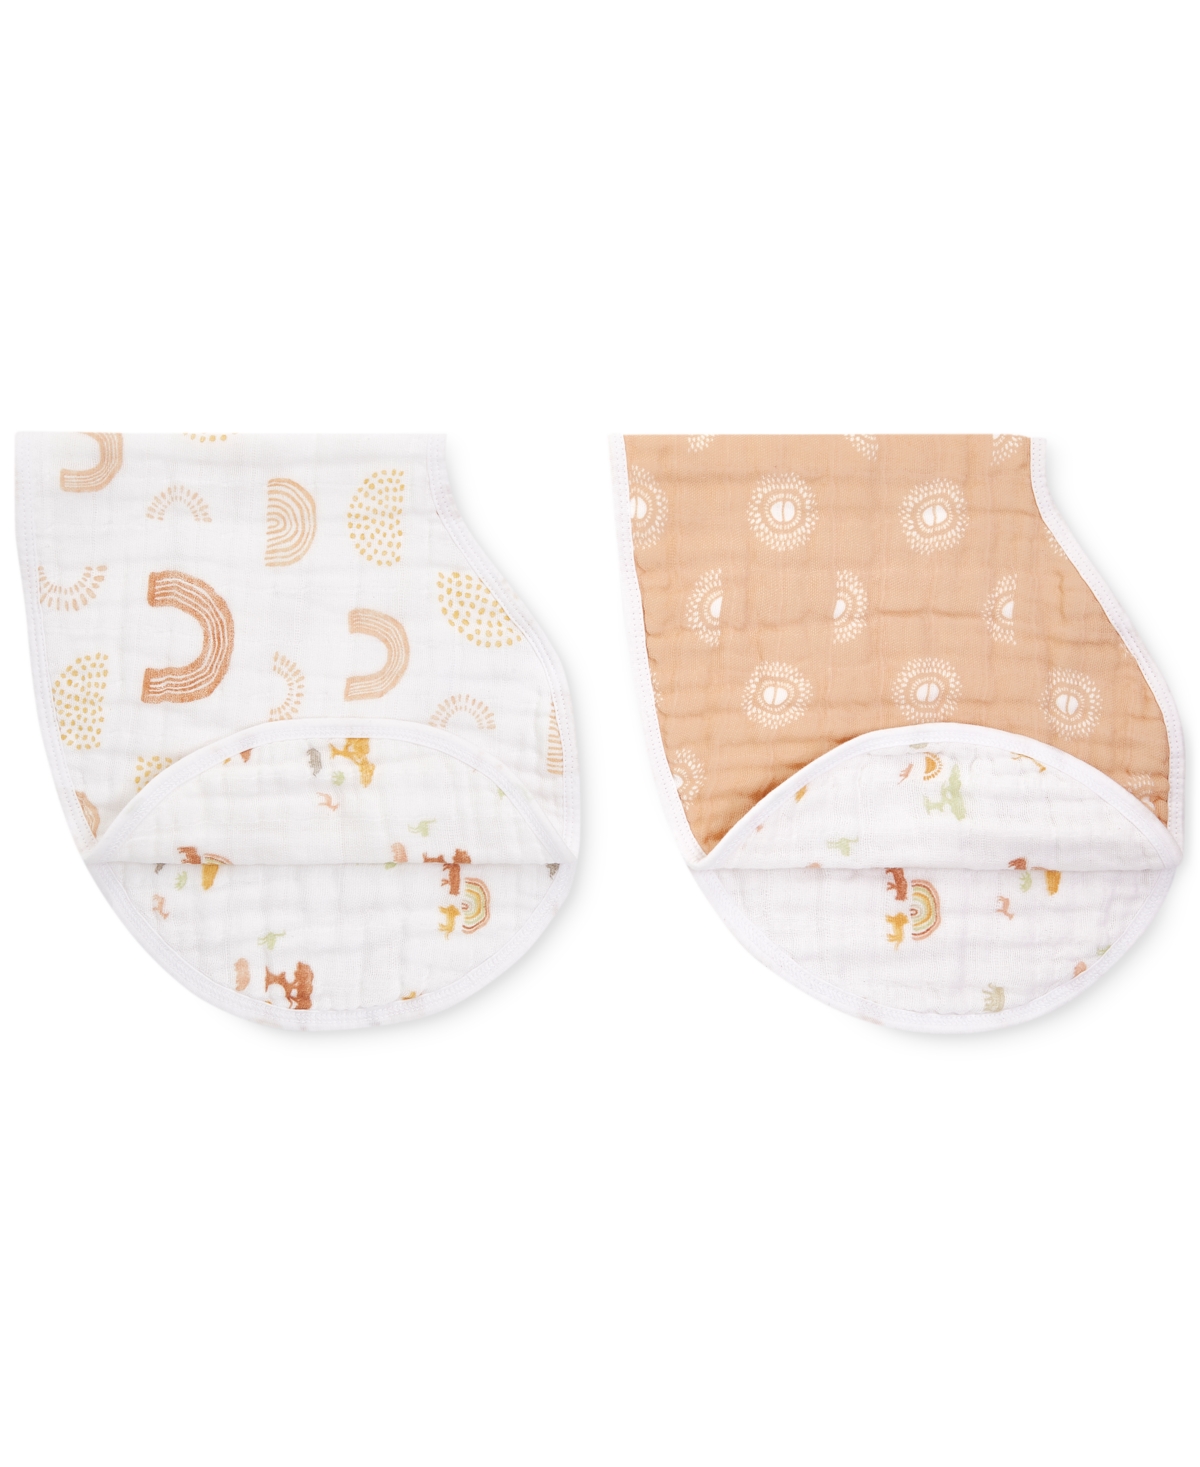 Aden By Aden + Anais Baby Keep Rising Burpy Bib, Pack Of 2 In Tan